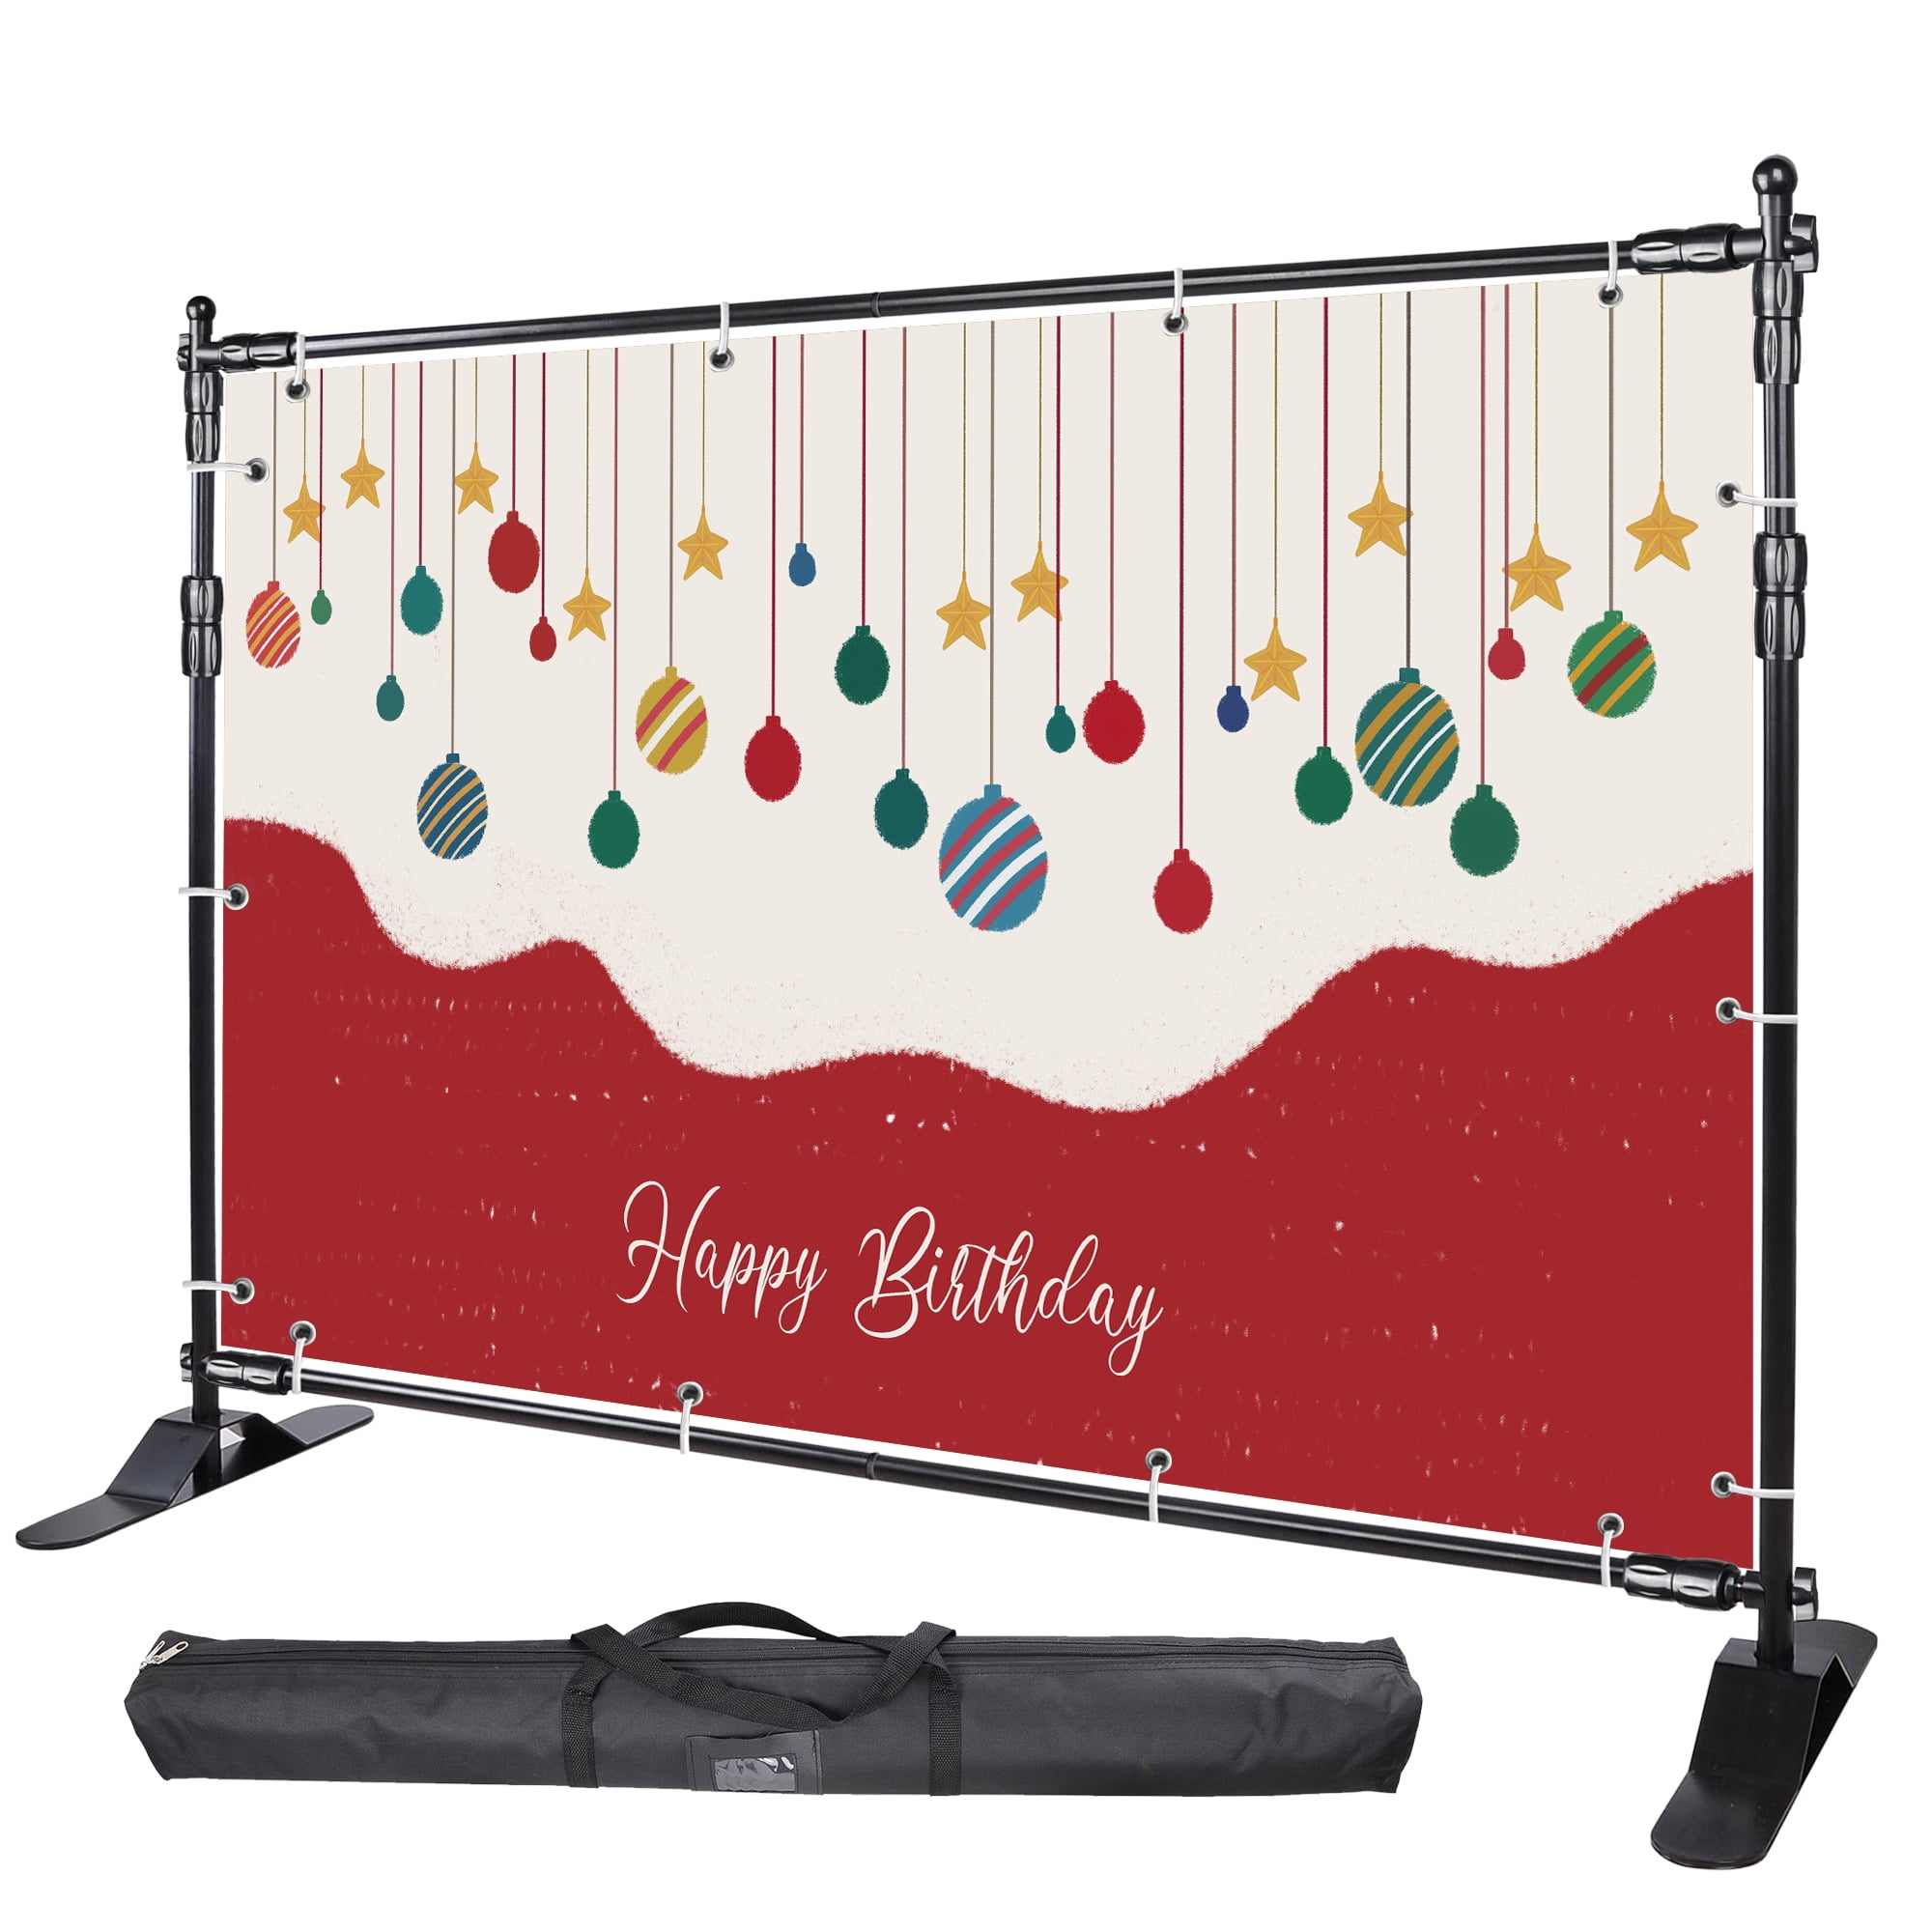 4*8' X 8' Adjustable Banner Stand Reuseable Telescopic Trade Show Wall 